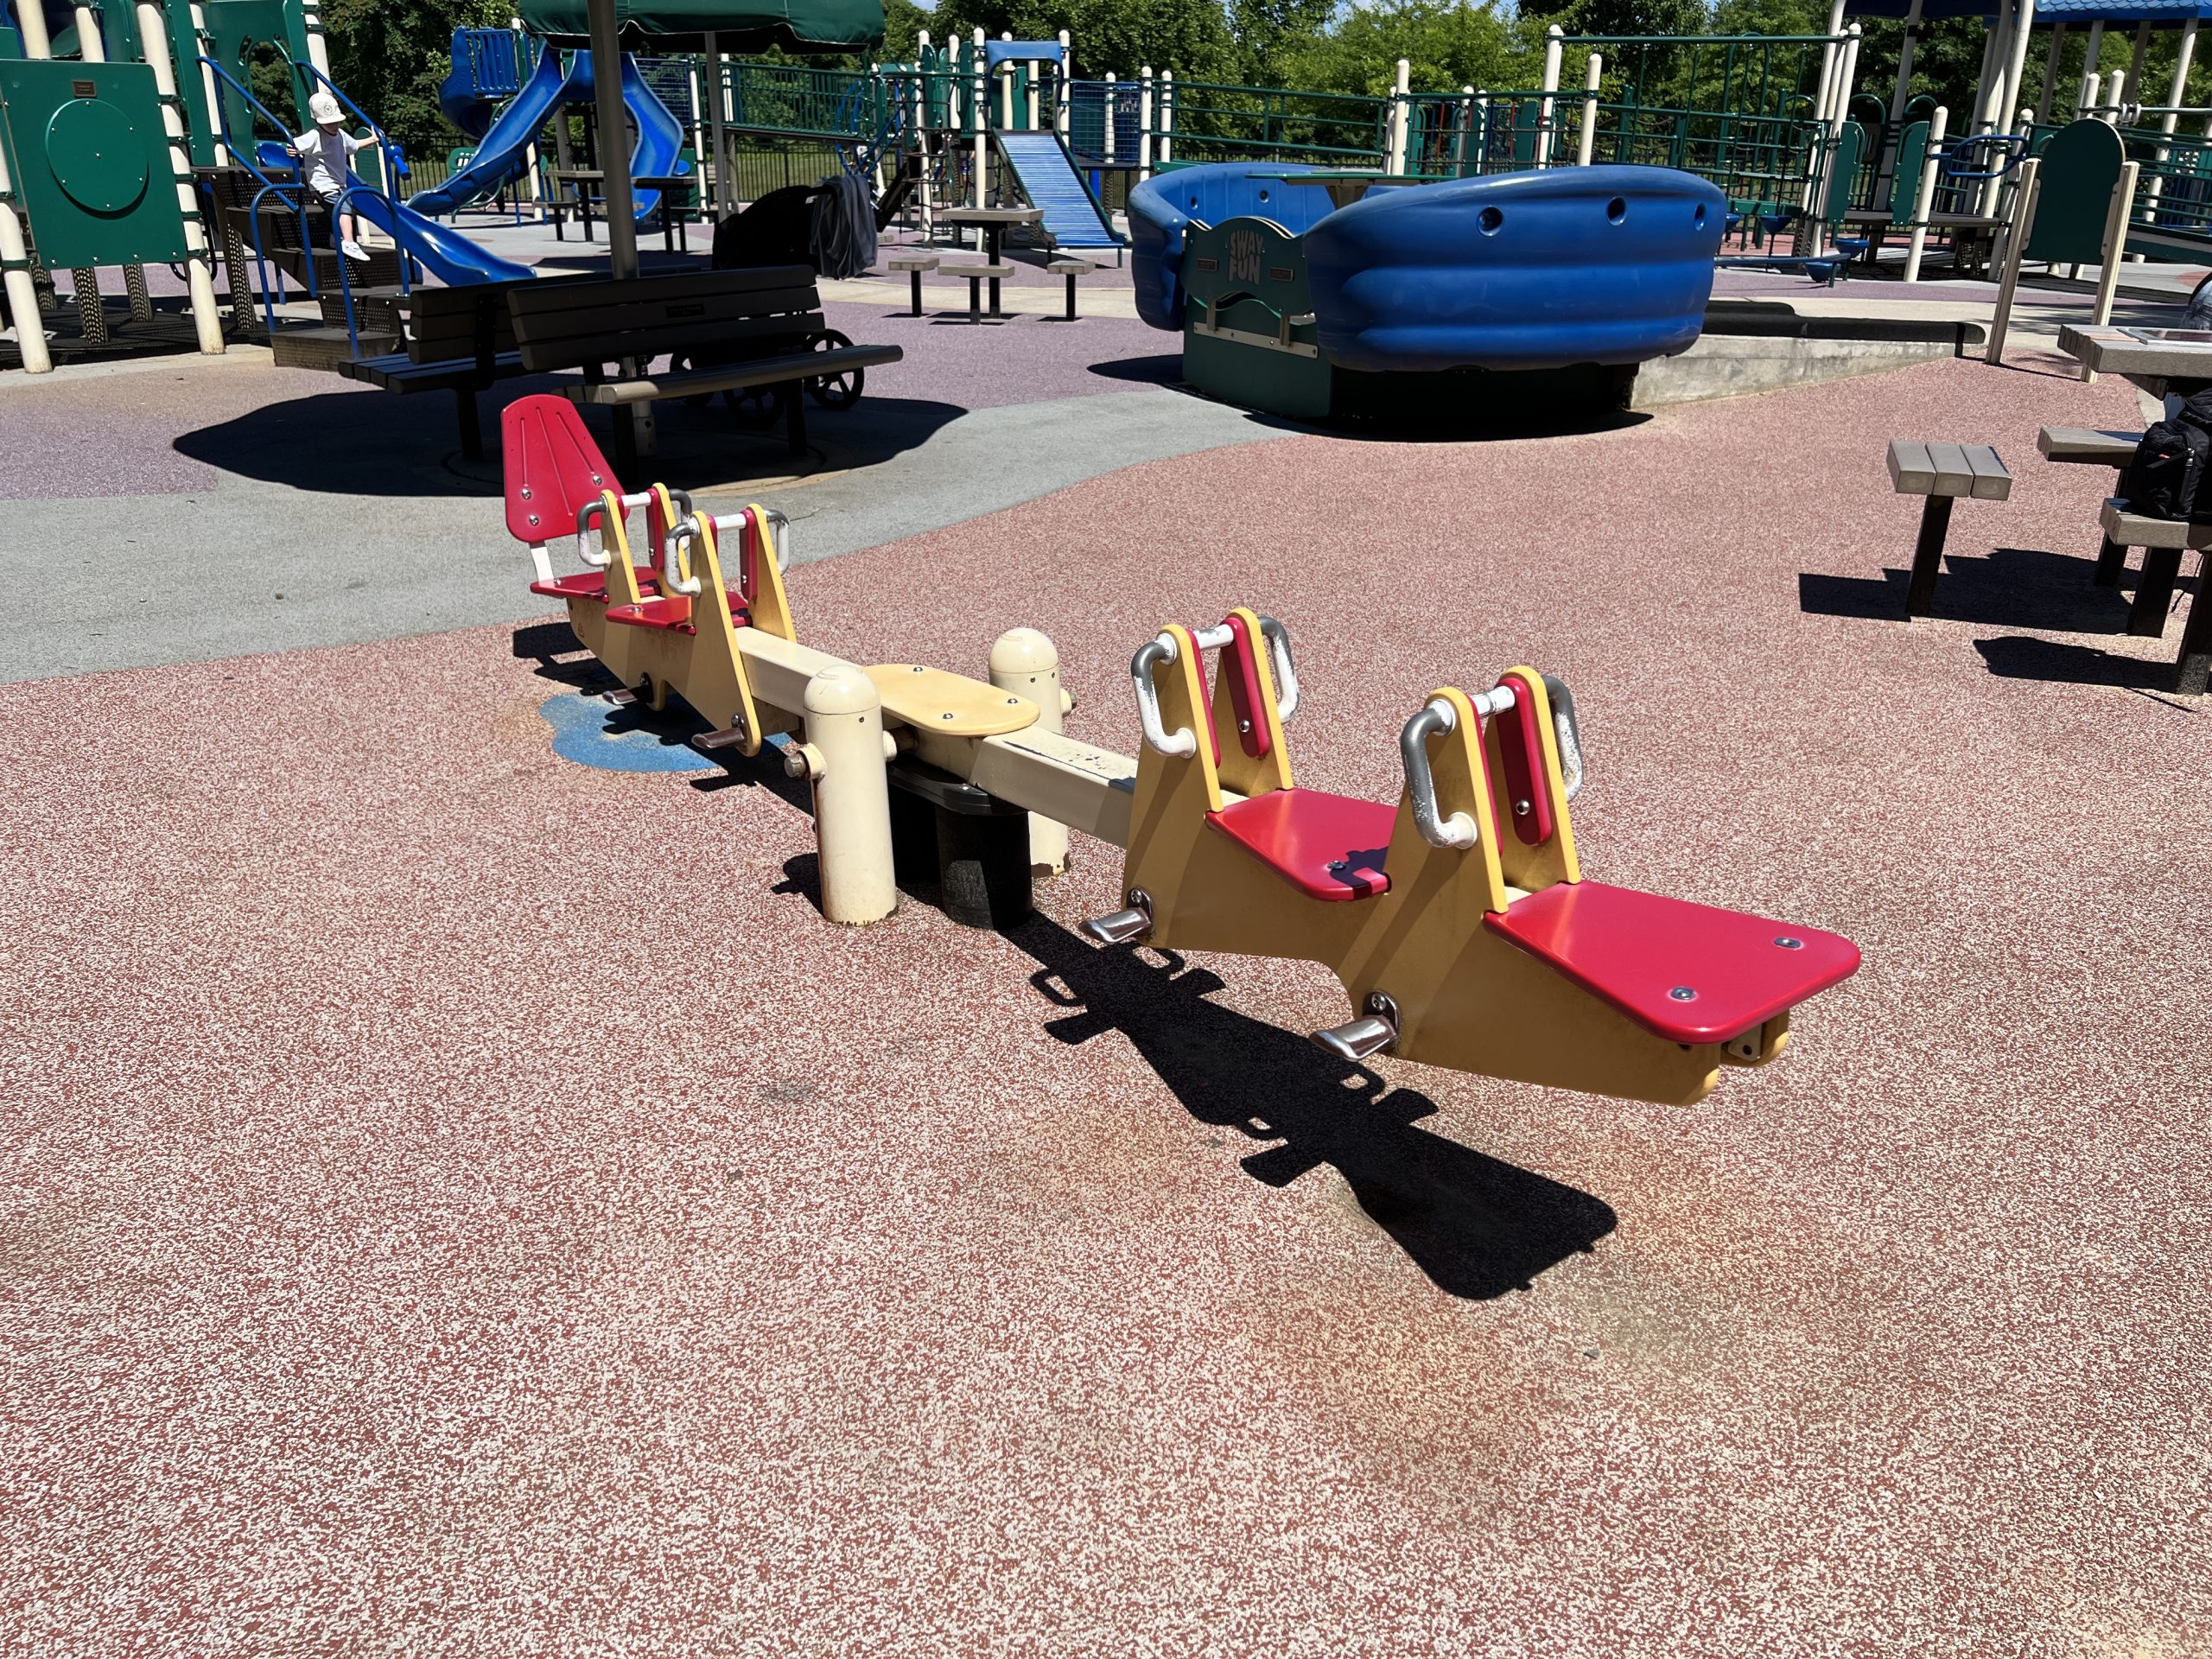 Challenger Place Park Playground in Colts Neck NJ 4 person see saw